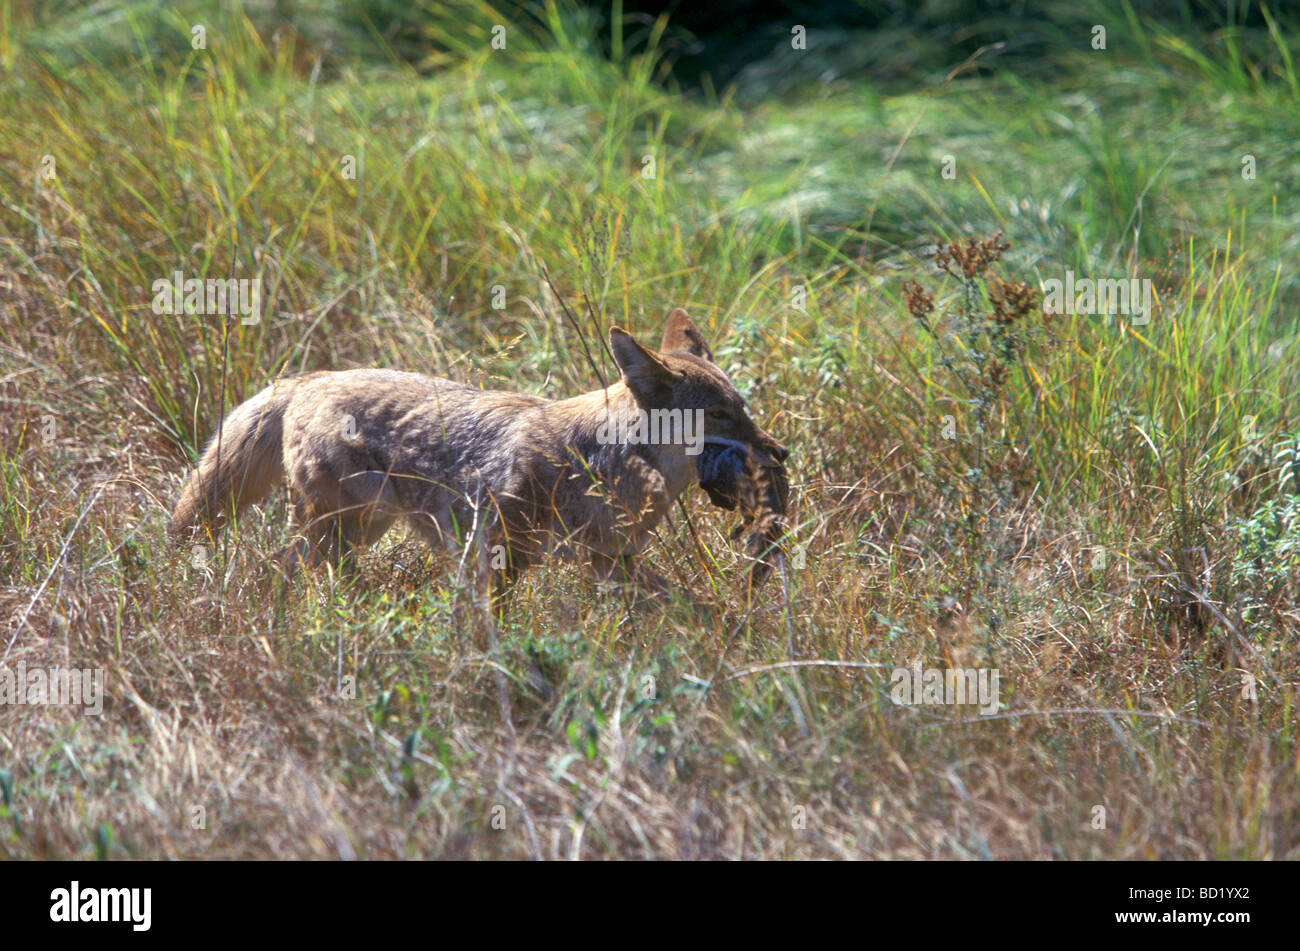 A coyote with its prey, a gray squirrel, in Yosemite National Park, California. Stock Photo